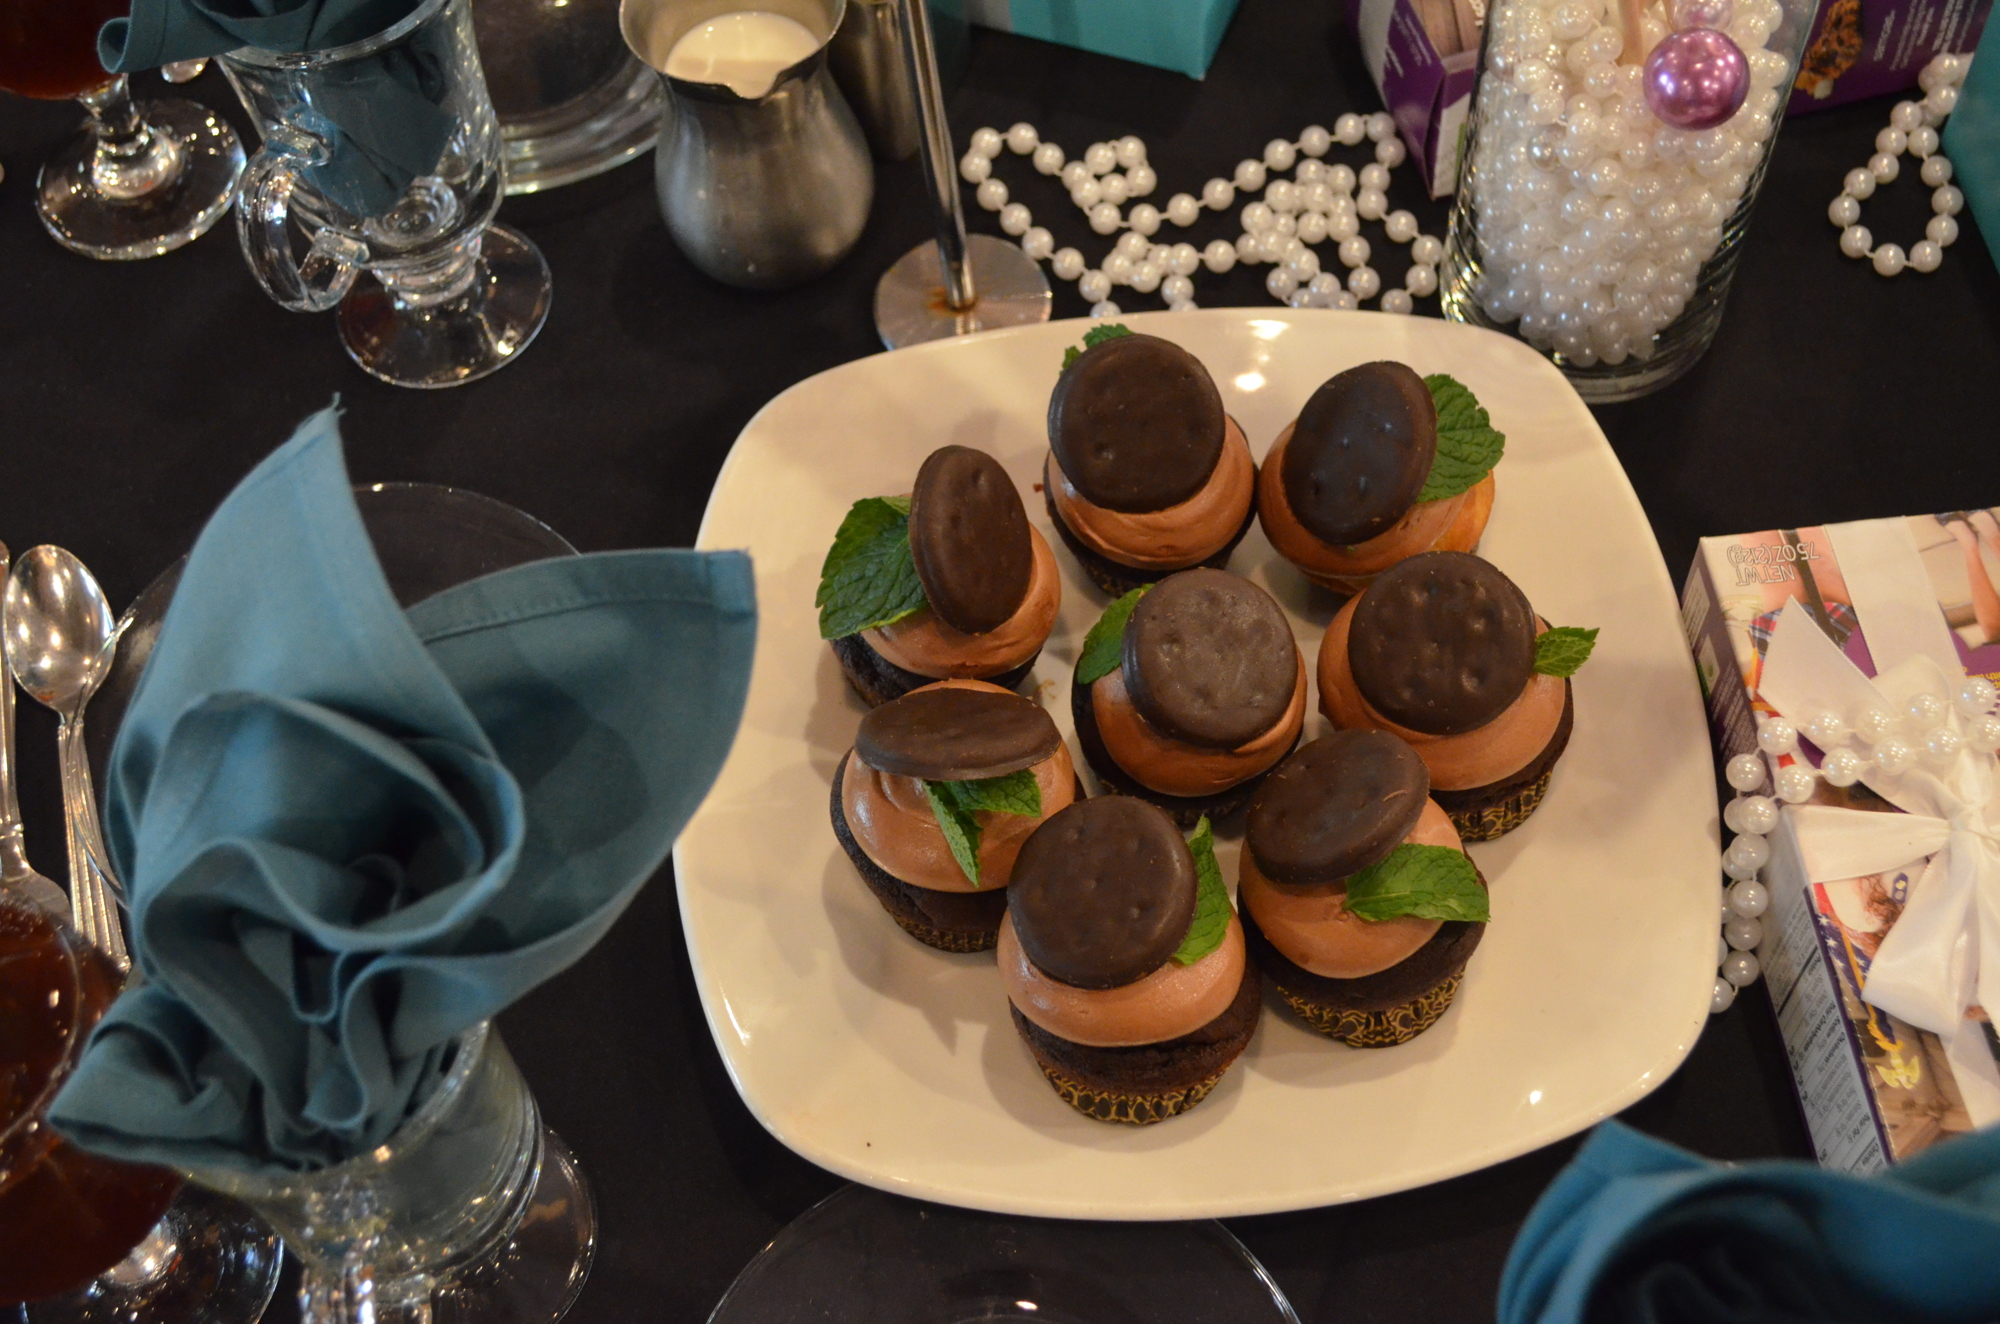 Chocolate cupcakes with chocolate frosting and a Girl Scout Thin Mint cookie garnish were served for dessert at the Little Black Dress with Pop! Fashion Show and Luncheon at Michael's On East on Friday, July 22.